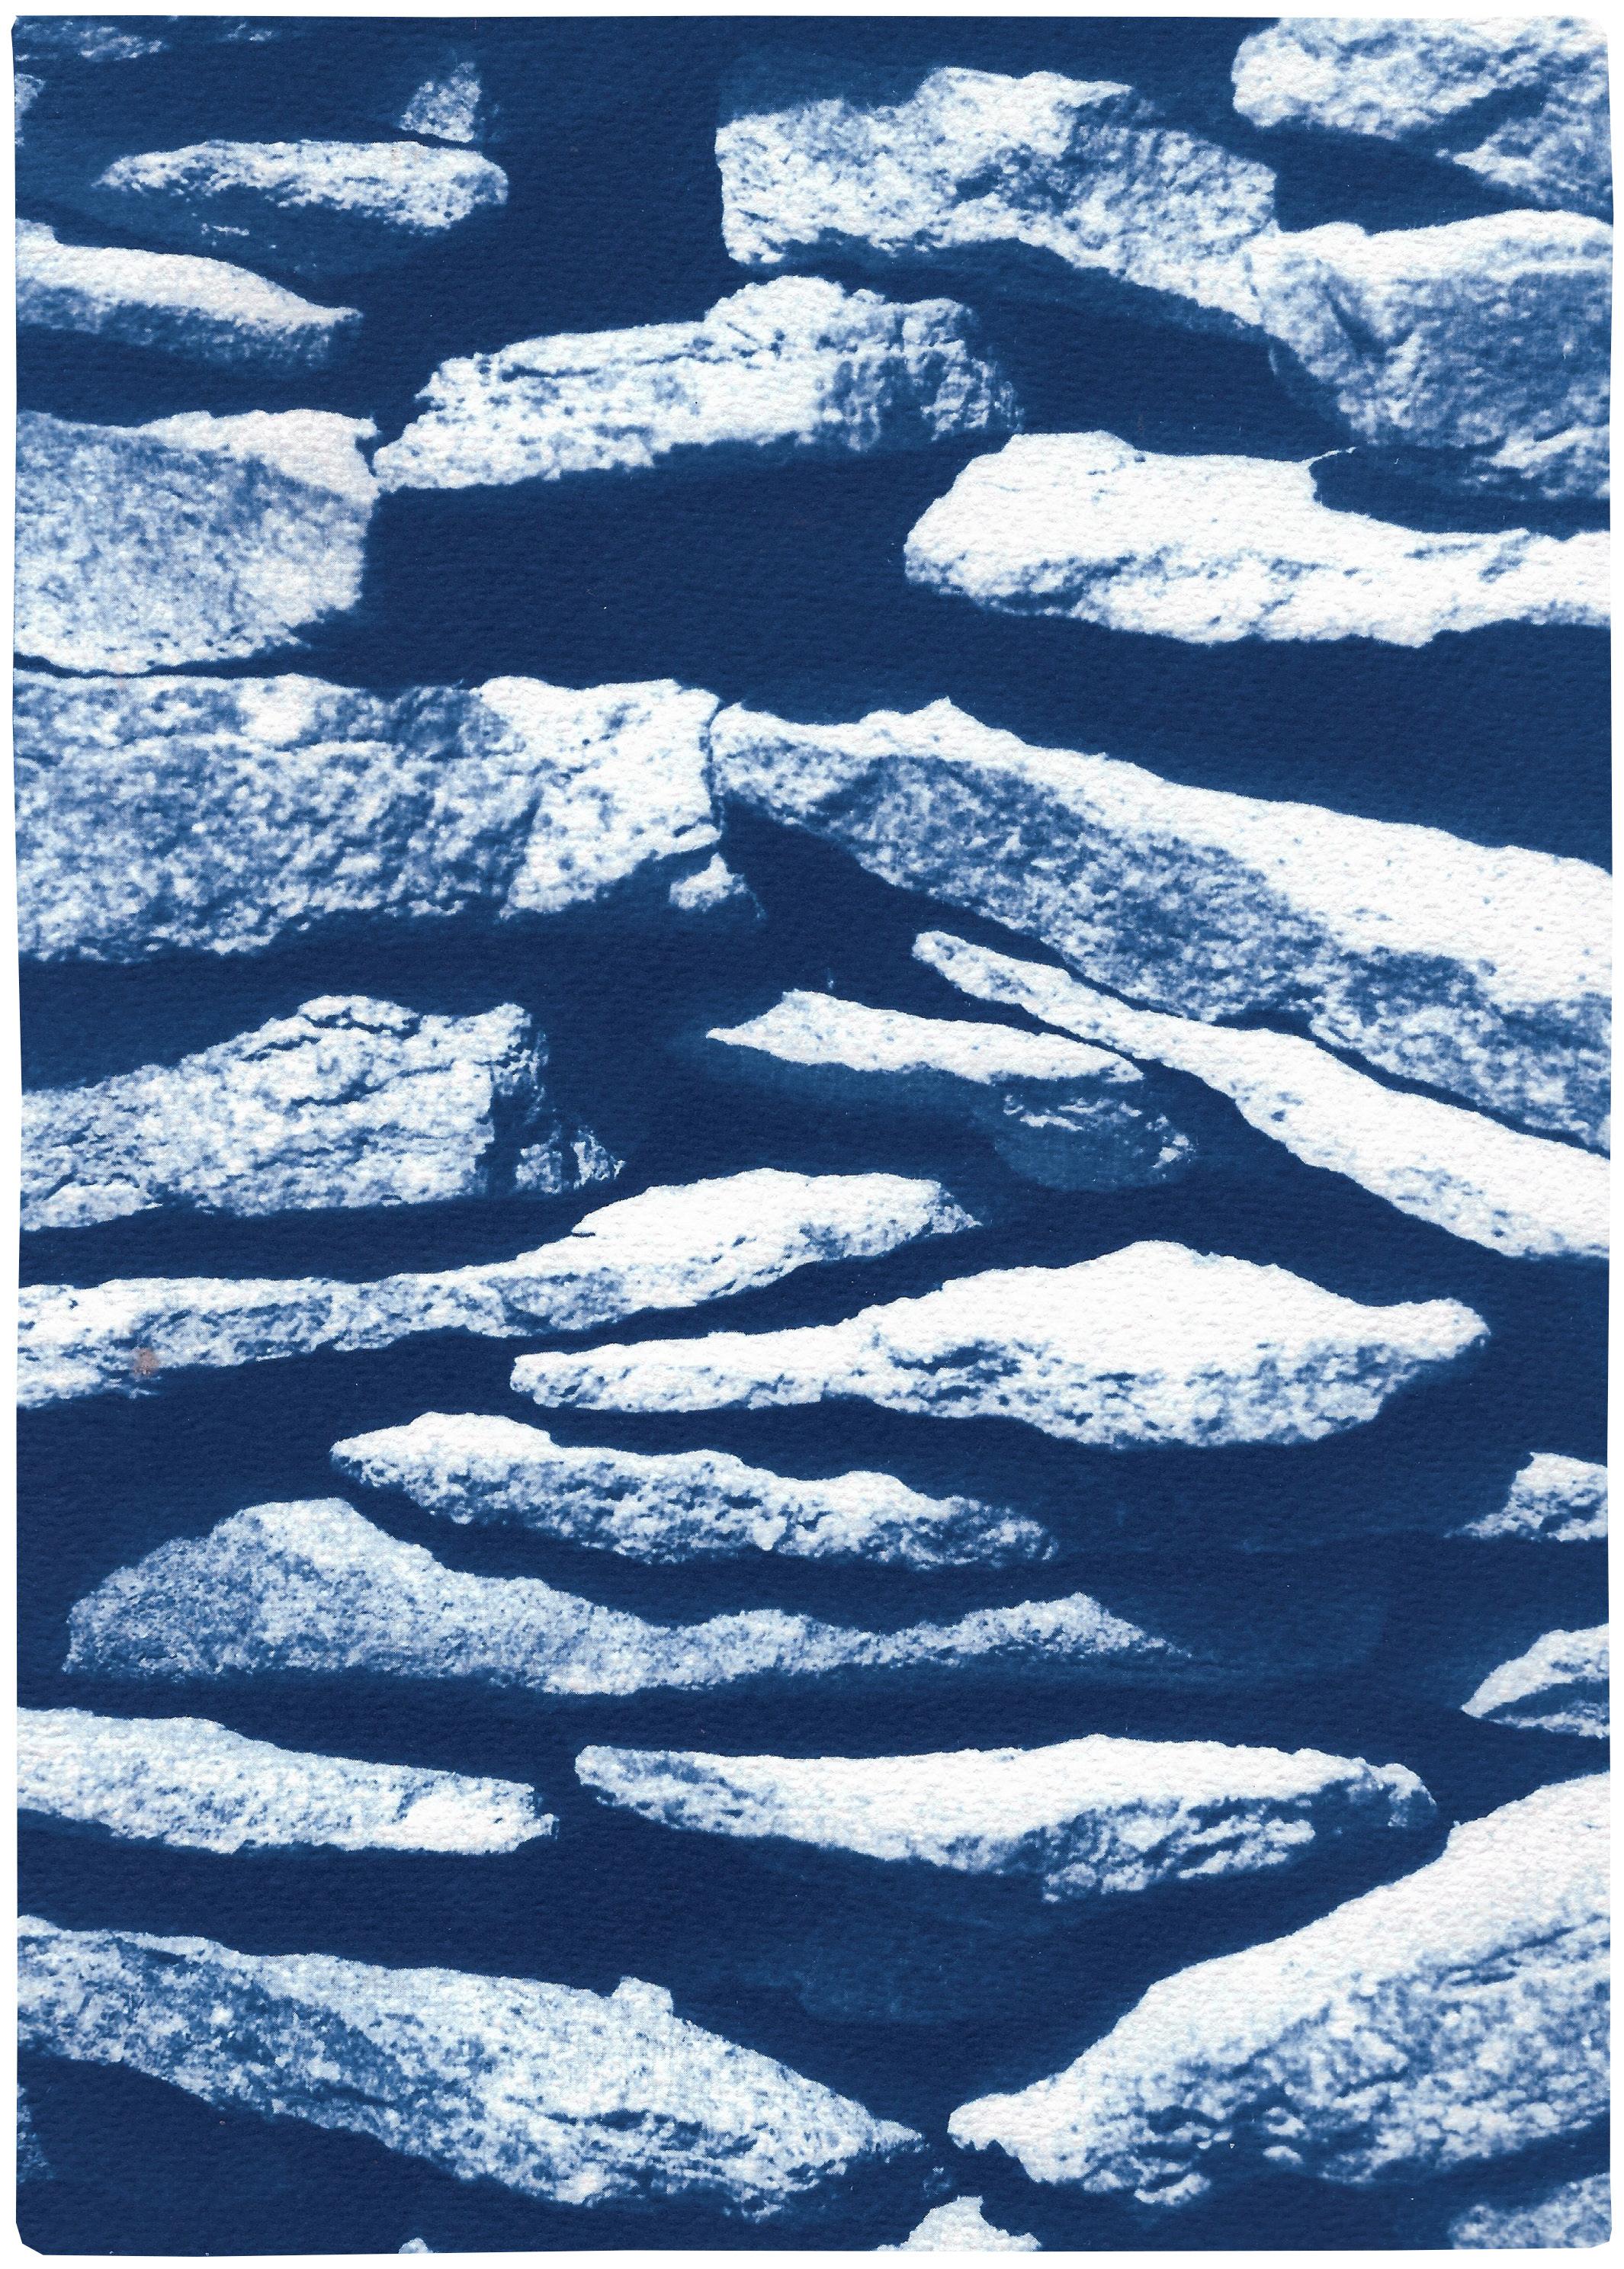 2021, Limited Edition Cyanotype of Flat Stone Stack, Garden Scene Textures, Blue